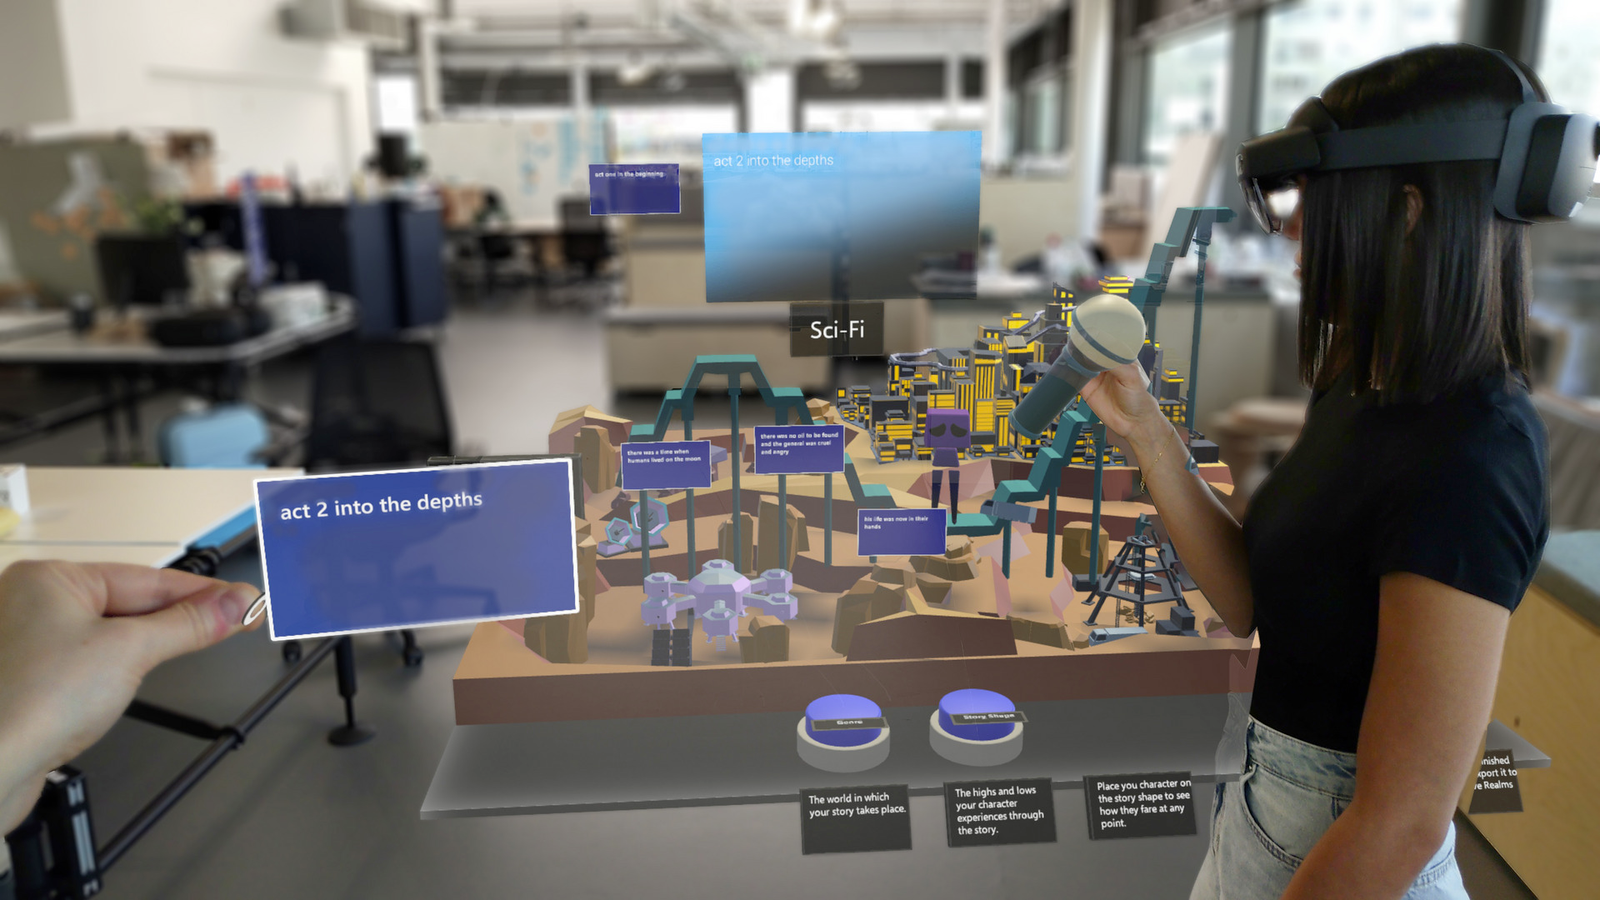 A woman holding a digital microphone. POV directly from a HoloLens. Holding a card that reads "Act 2: Into the depths".